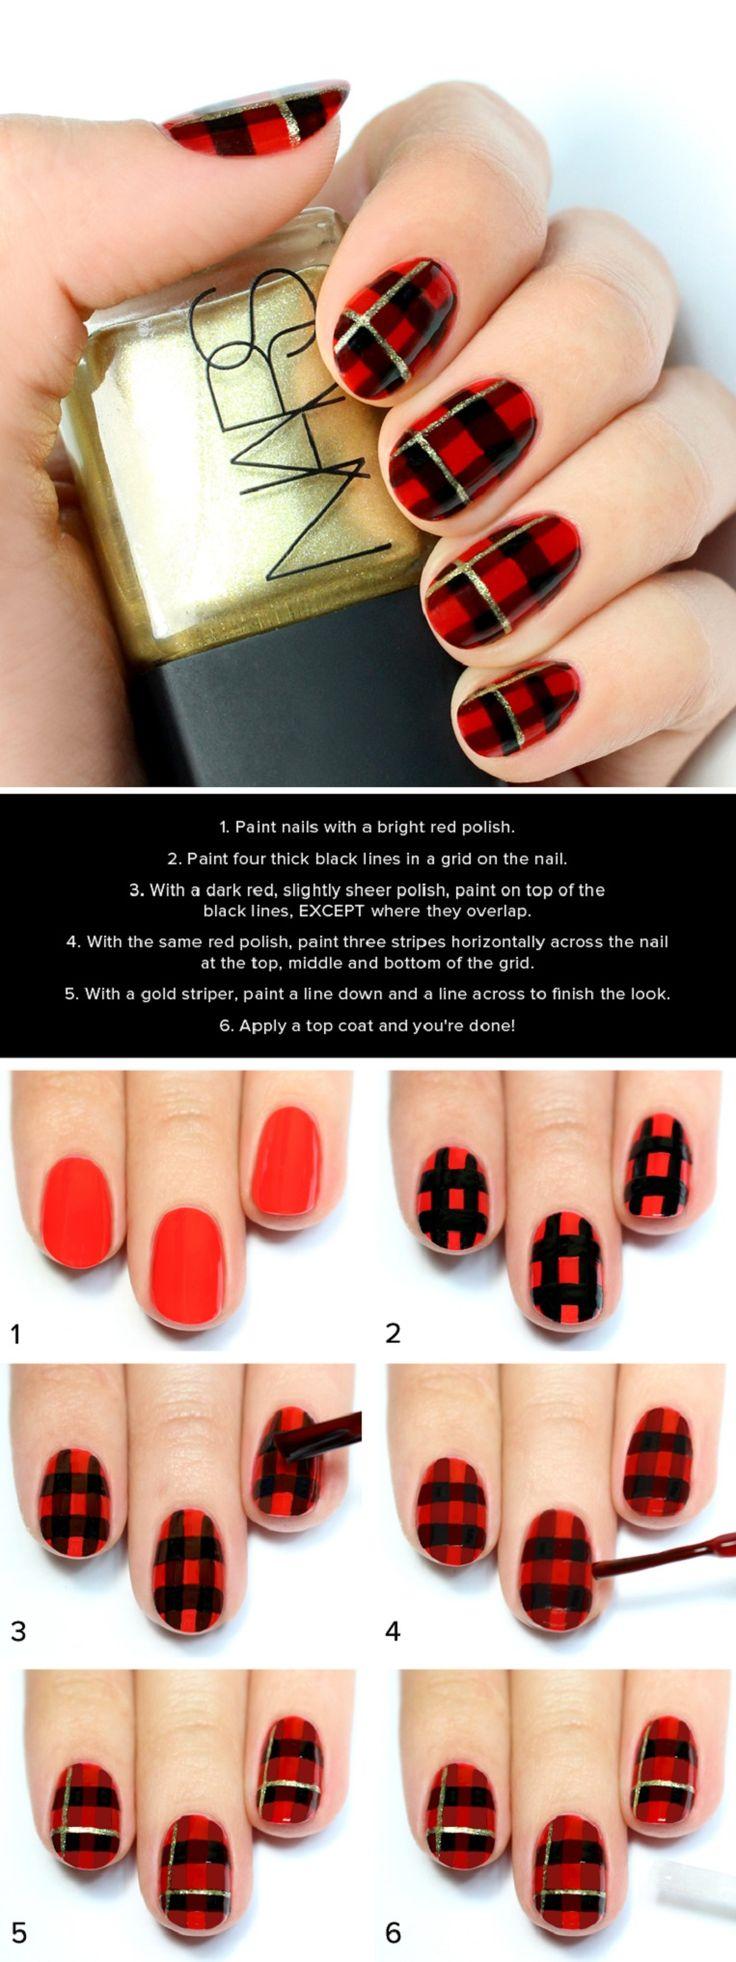 Wedding - 15 Christmas Nail Art Tutorials You NEED In Your Festive Life